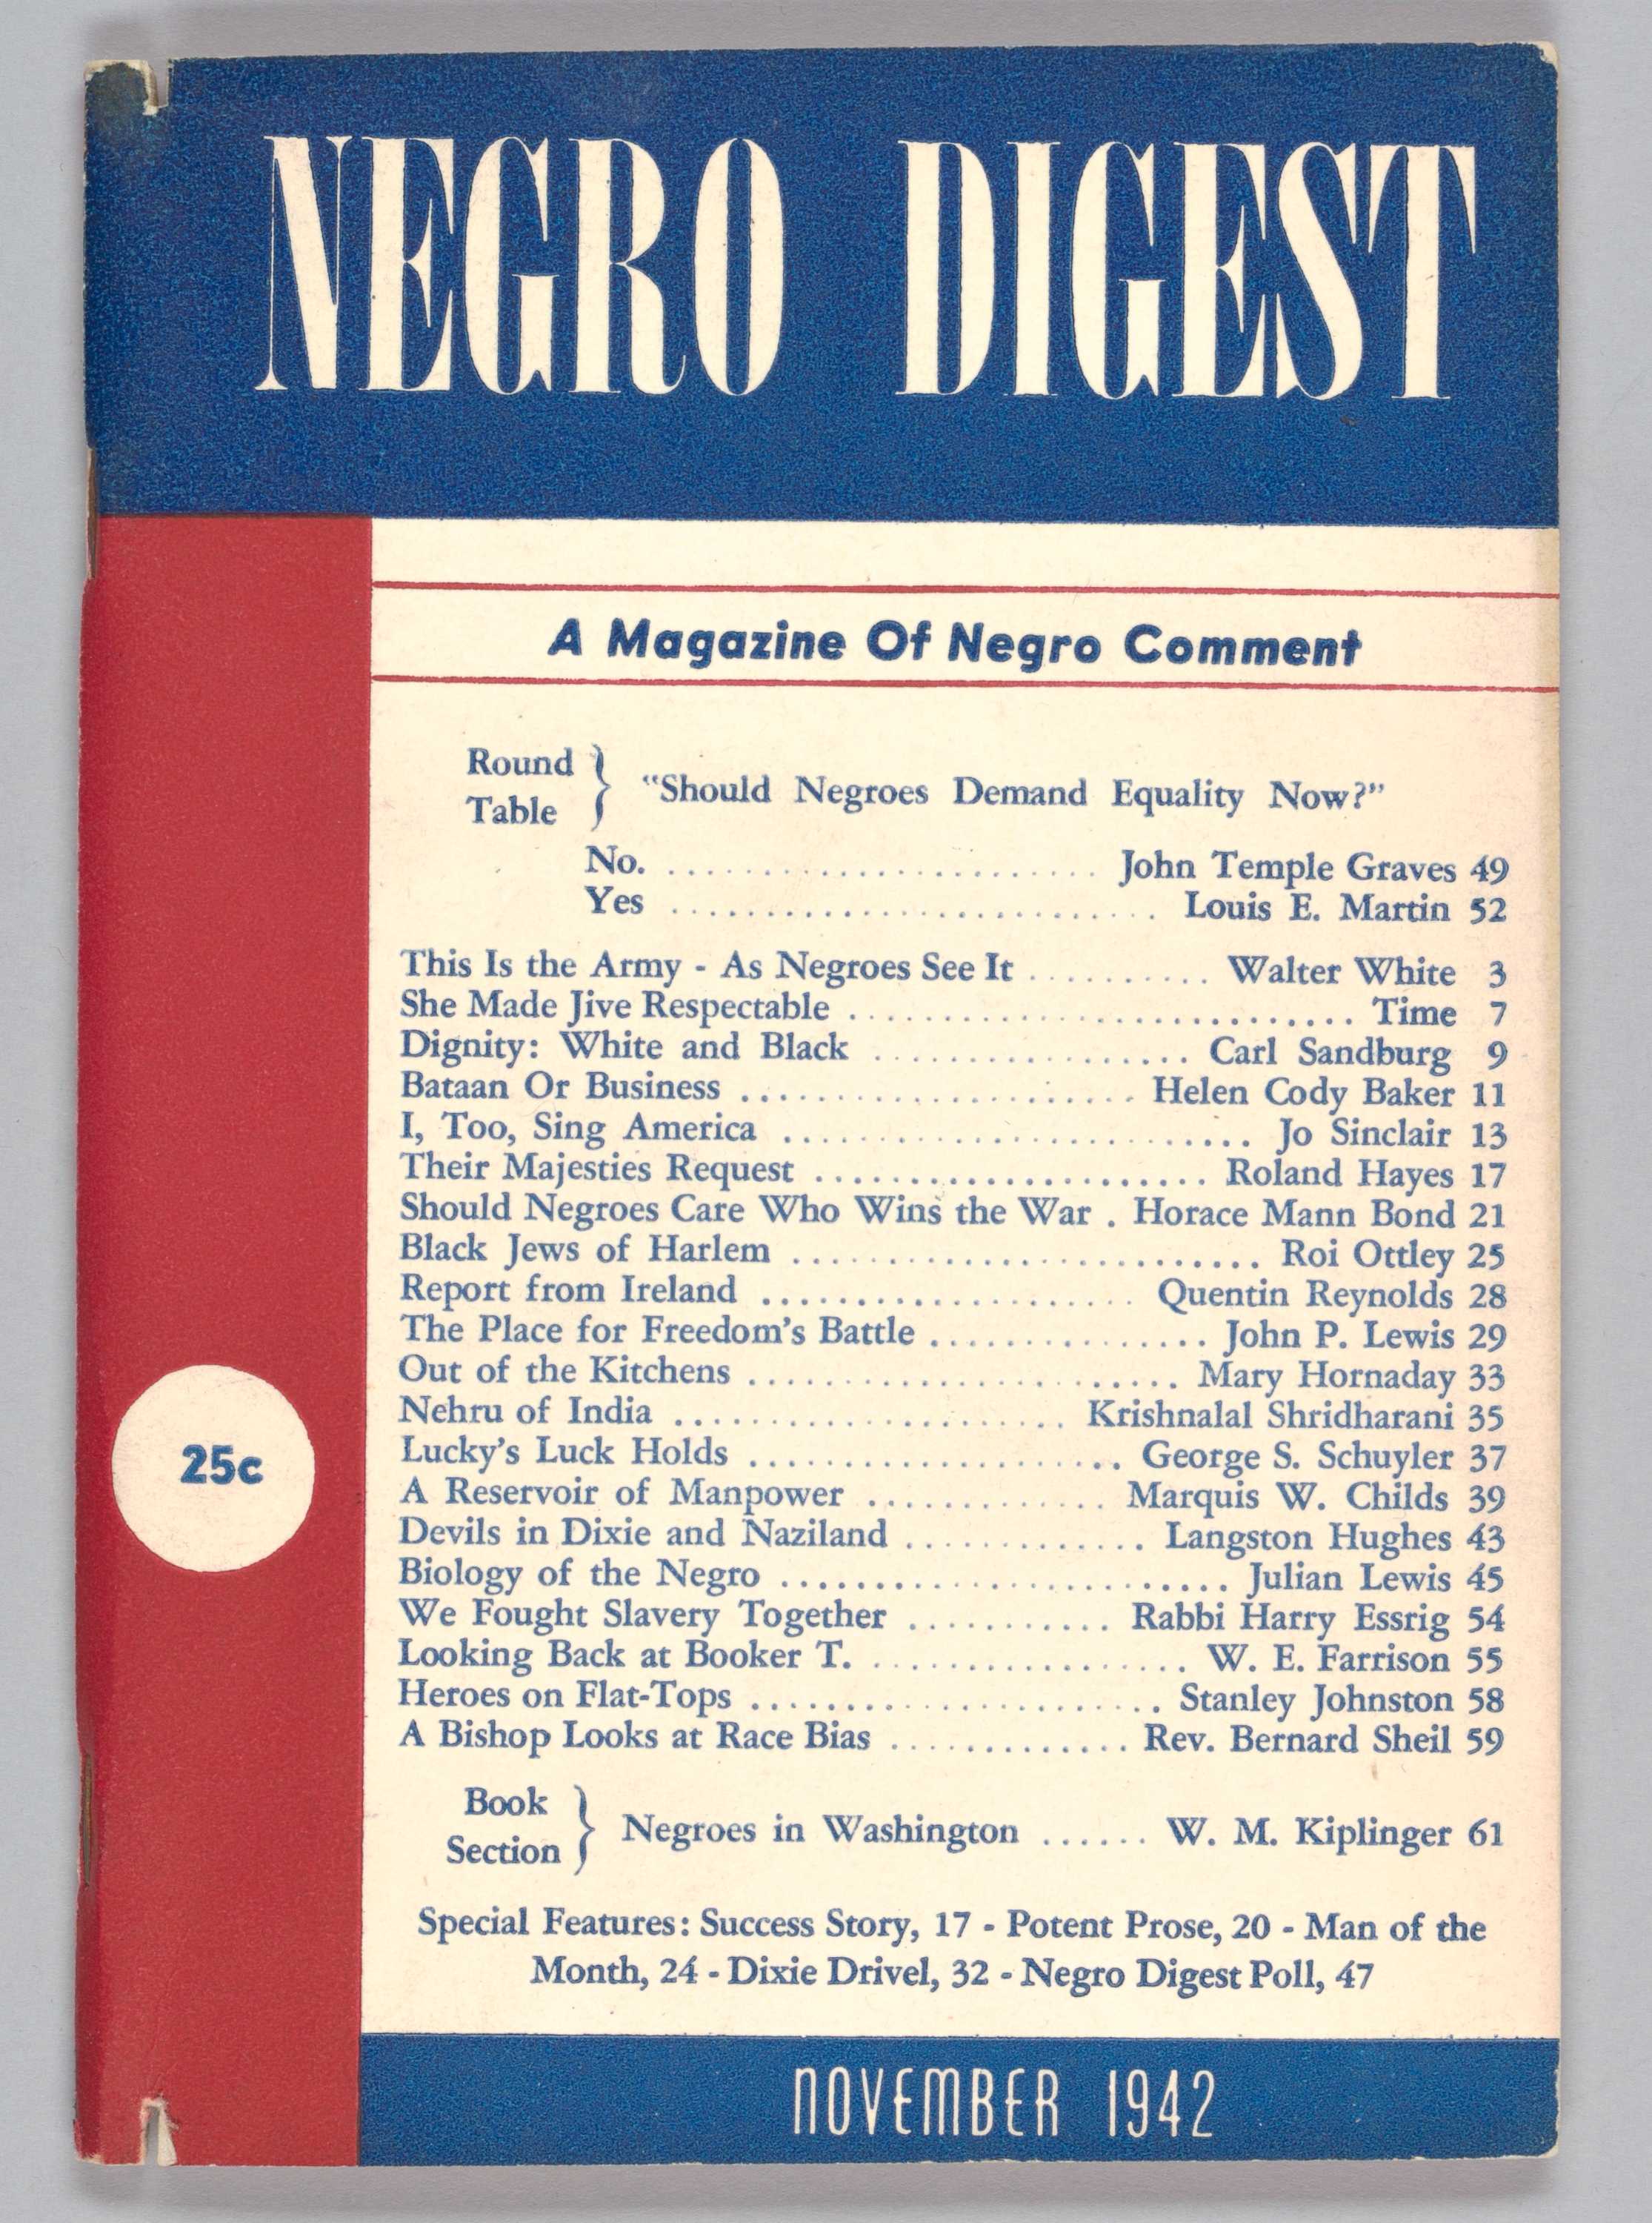 Negro Digest, volume 1, number 1 (first issue).